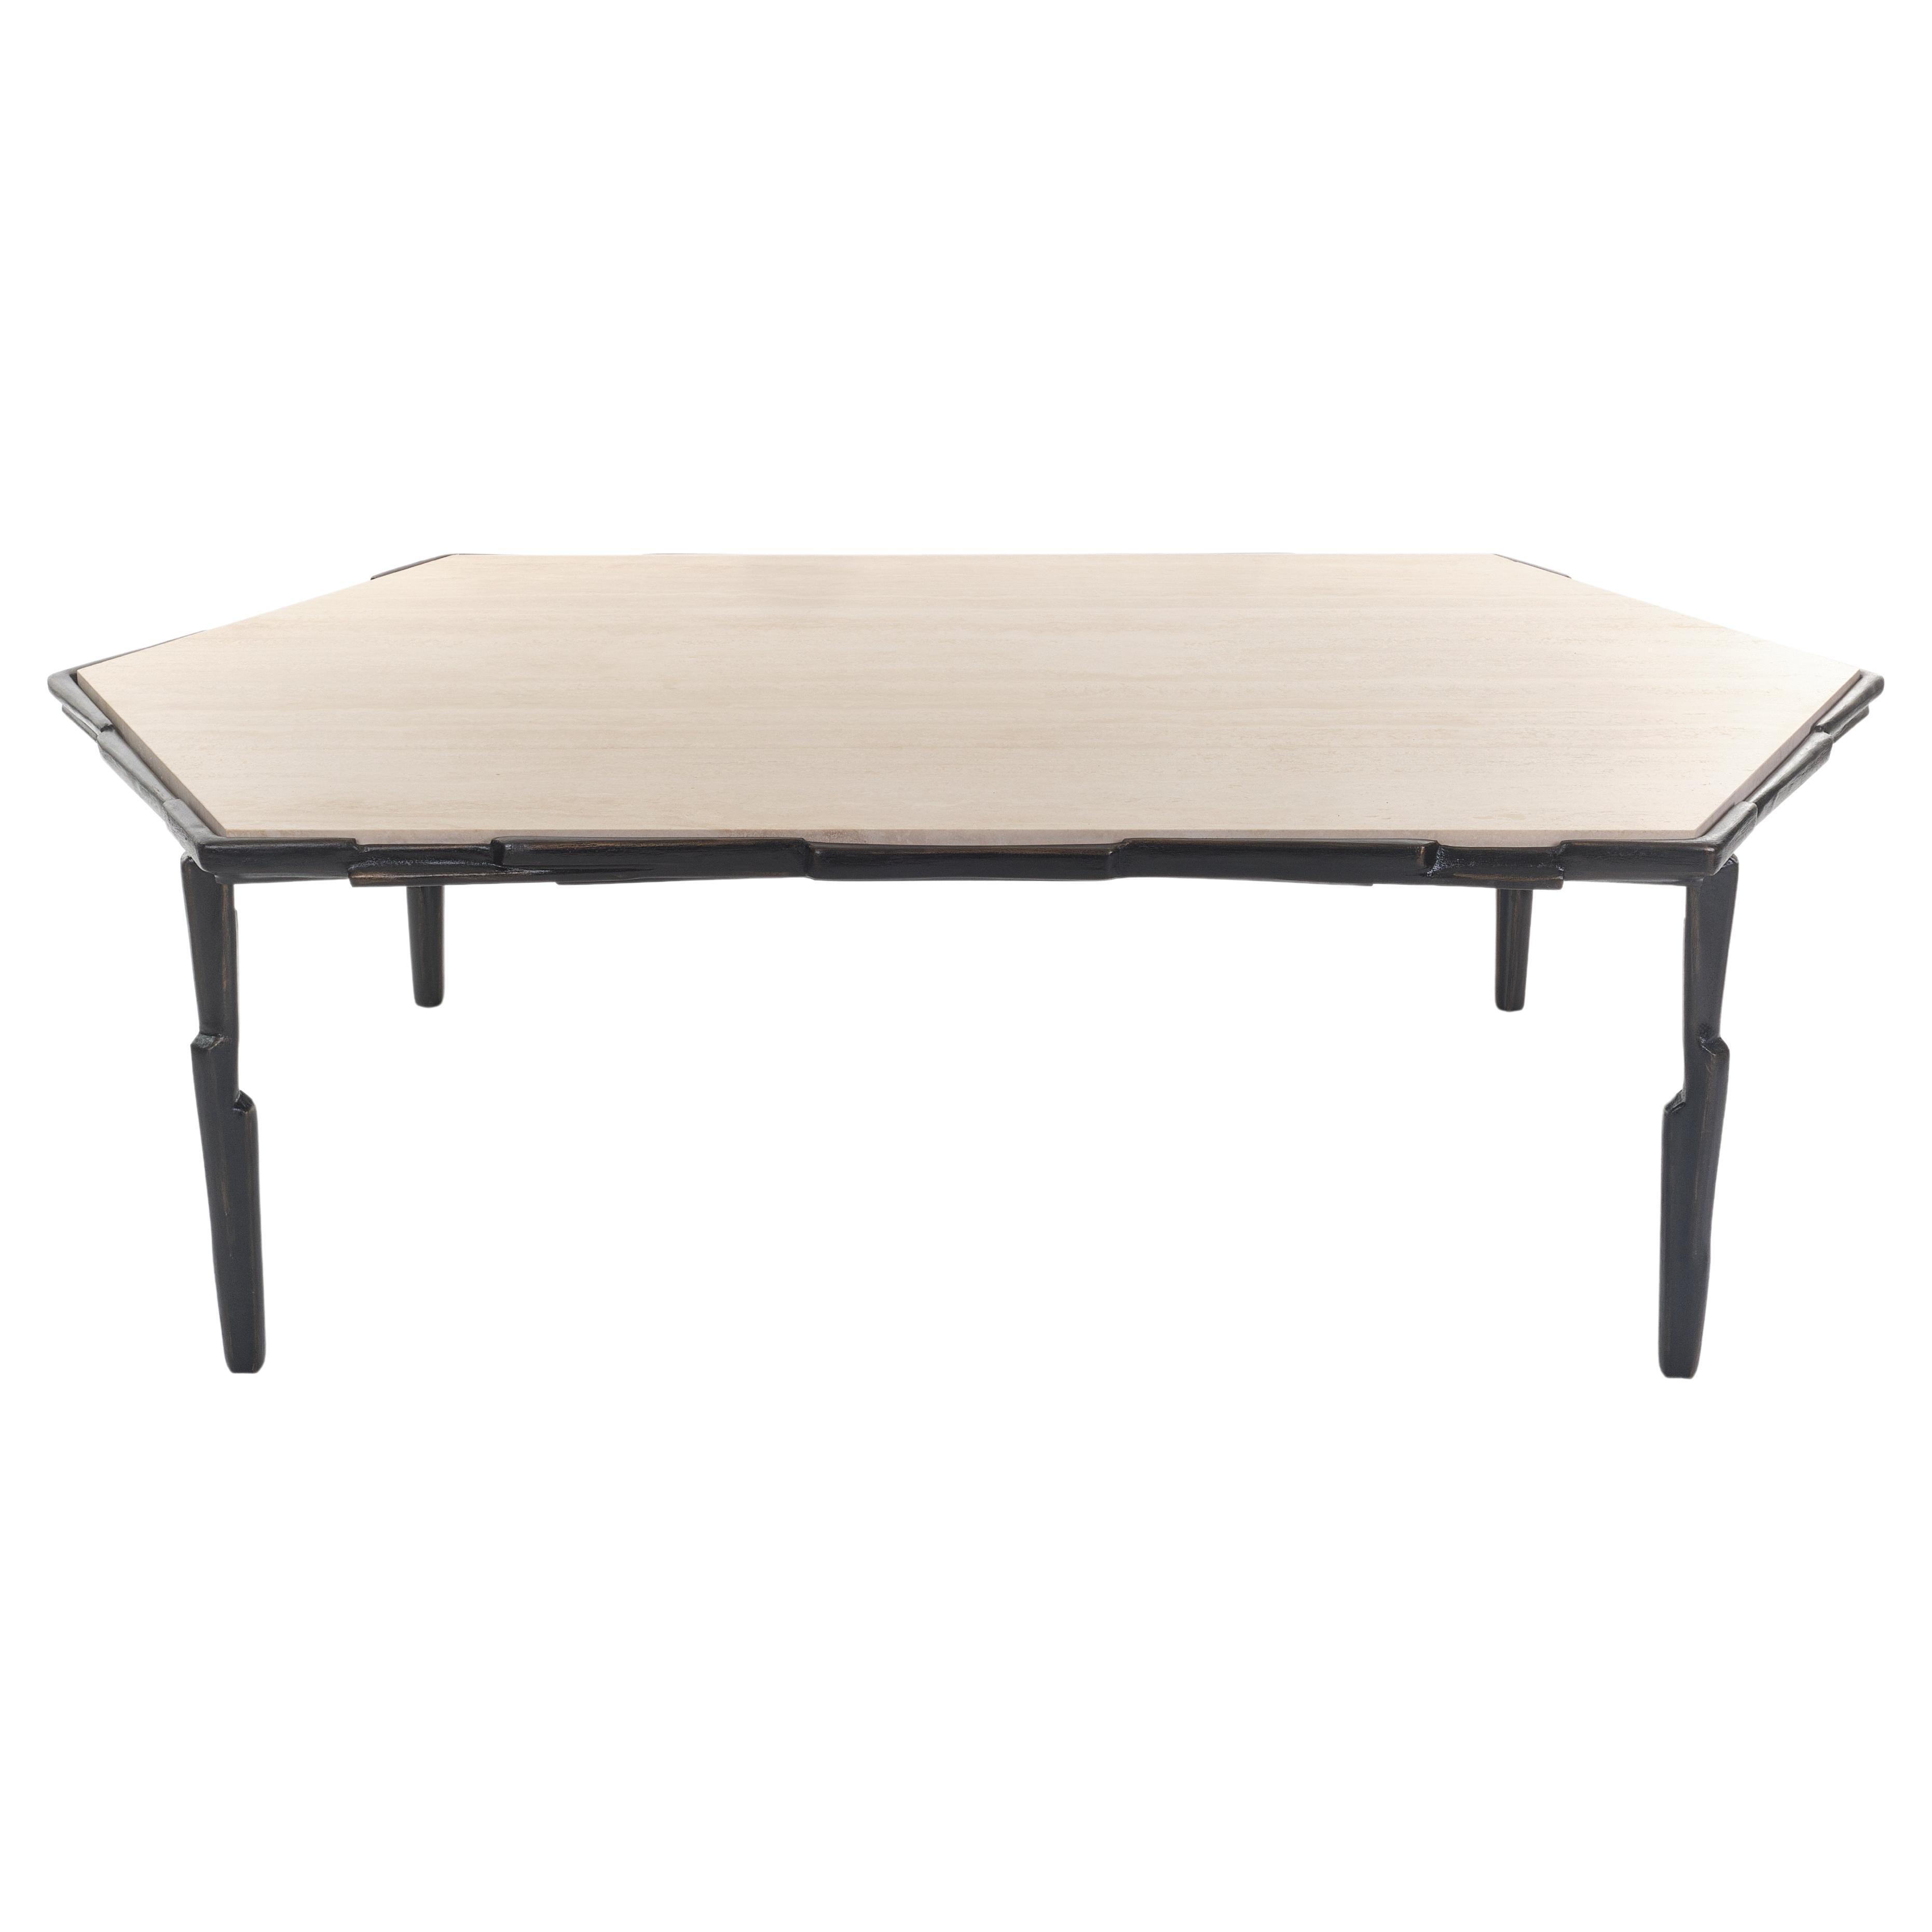 “Linea”, Limited Edition Coffee Table, Bronze Plaster Finish, Benediko For Sale